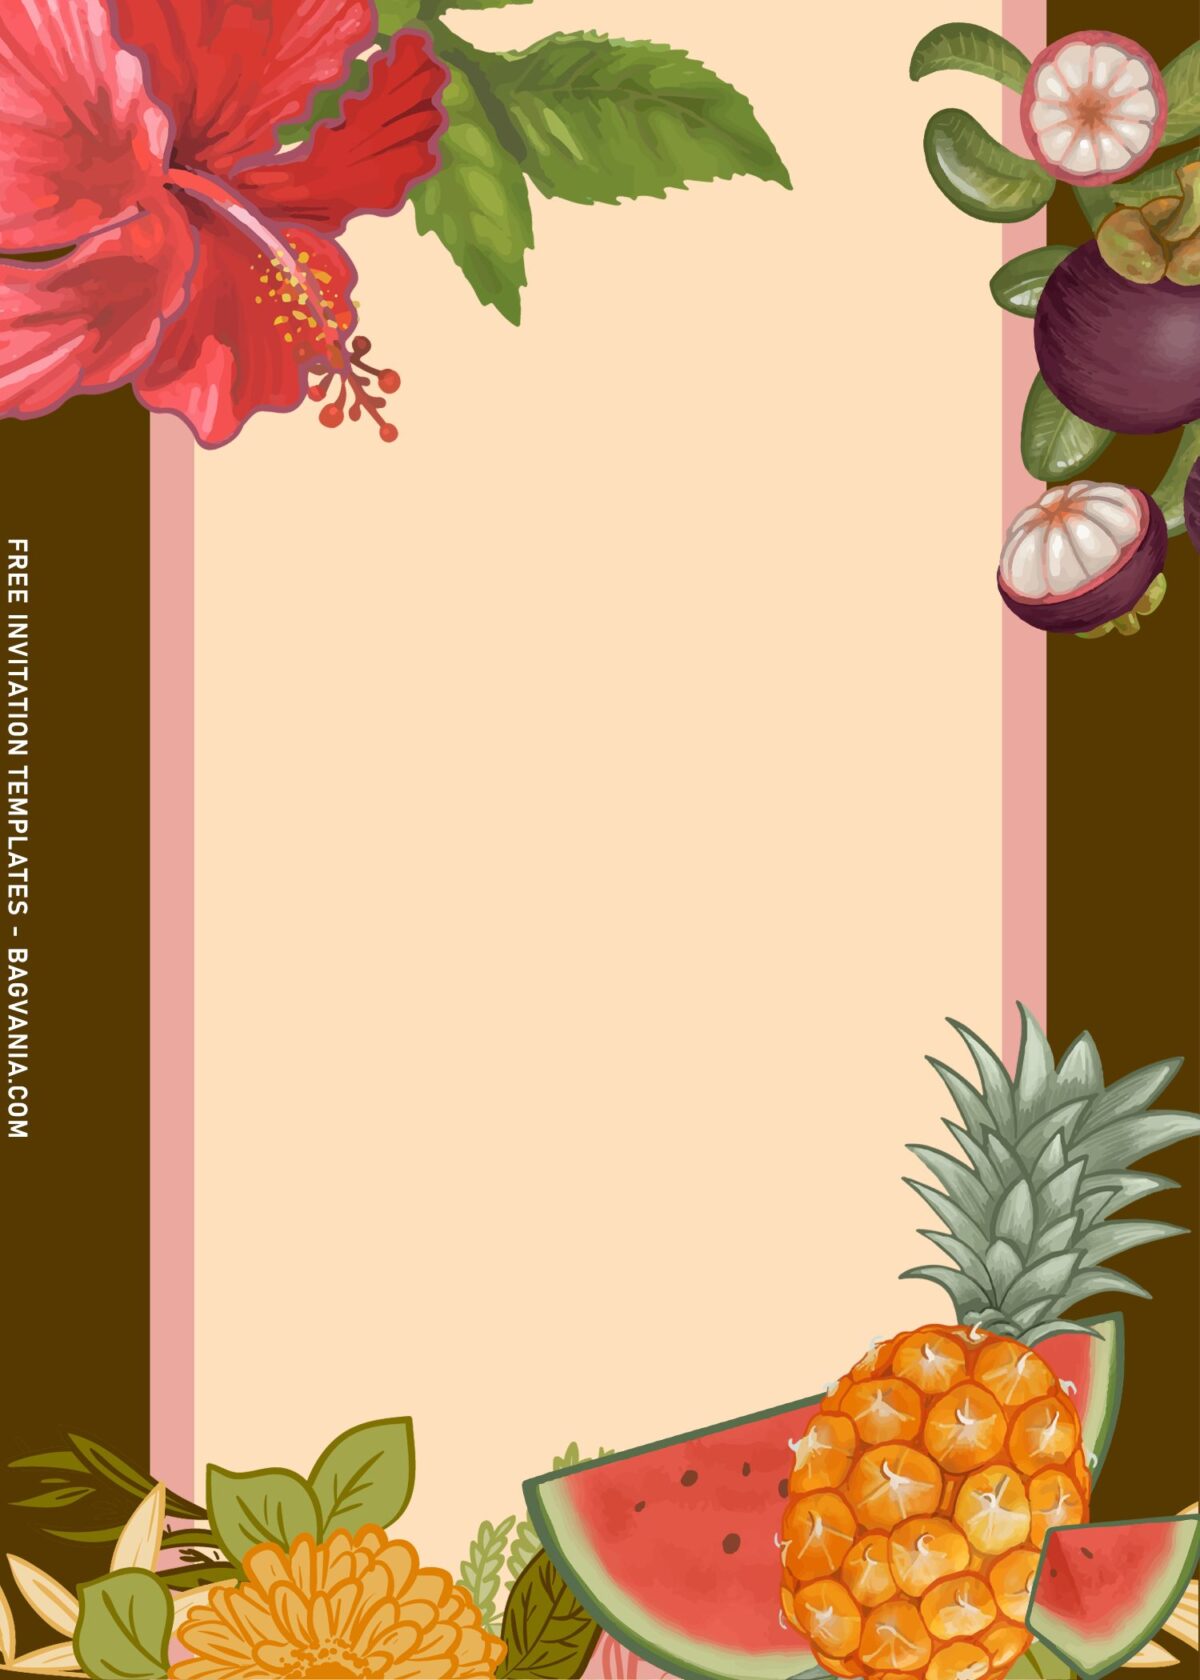 8+ Personalized Luau Tropical Summer Party Invitation Templates with pineapple